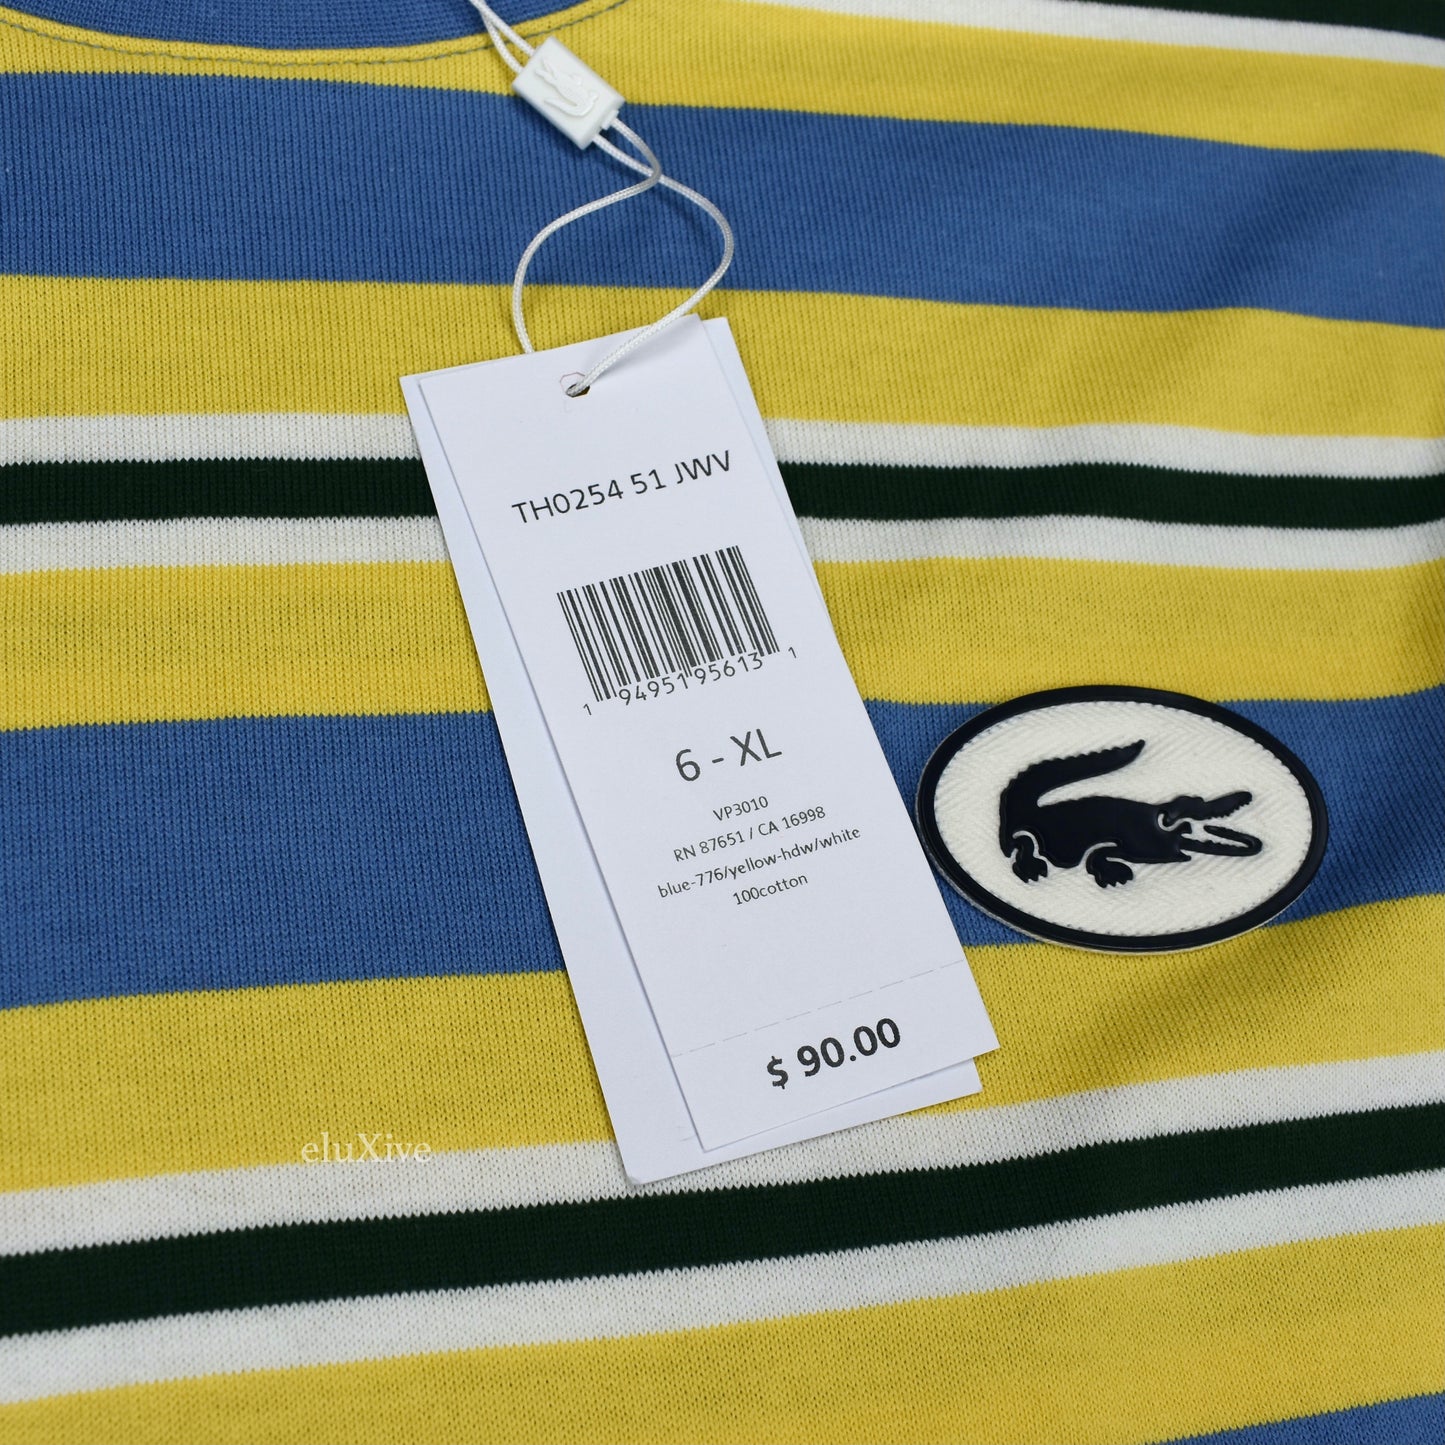 Lacoste - Yellow & Blue Striped L/S T-Shirt